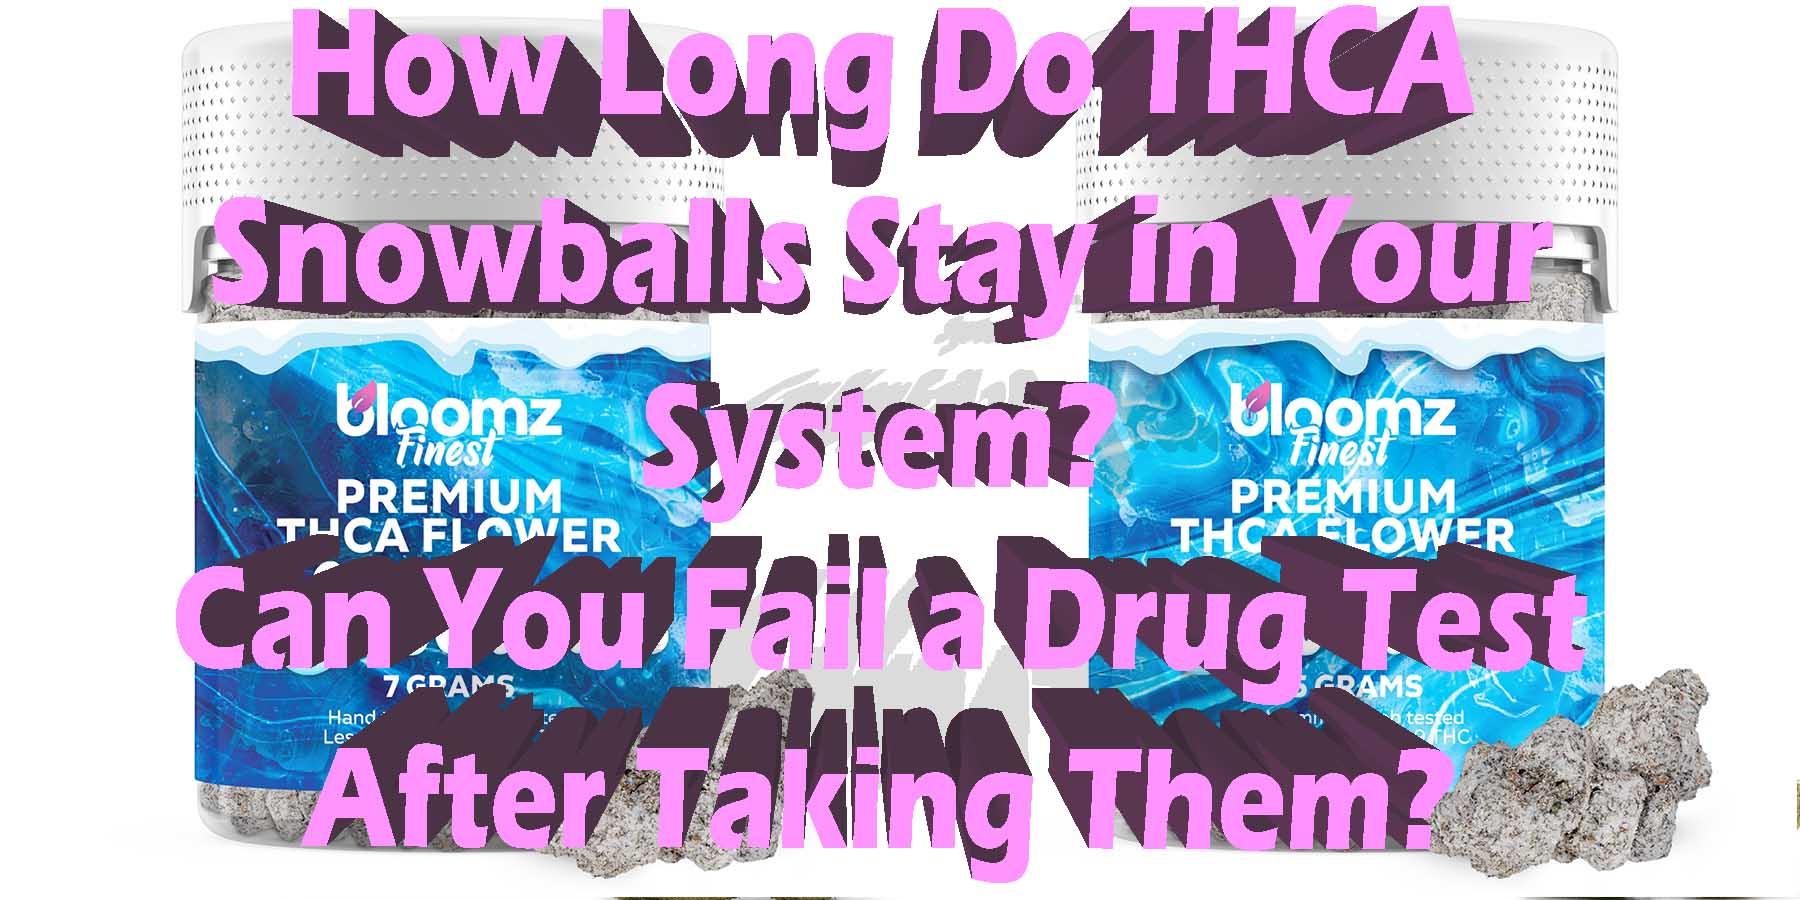 How Long Do THCA Snowballs Stay in Your System LowestPrice Coupon Discount For Smoking Best High Smoke Shop Online Near Me Online Smoke Shop StrongestBrand Best Bloomz